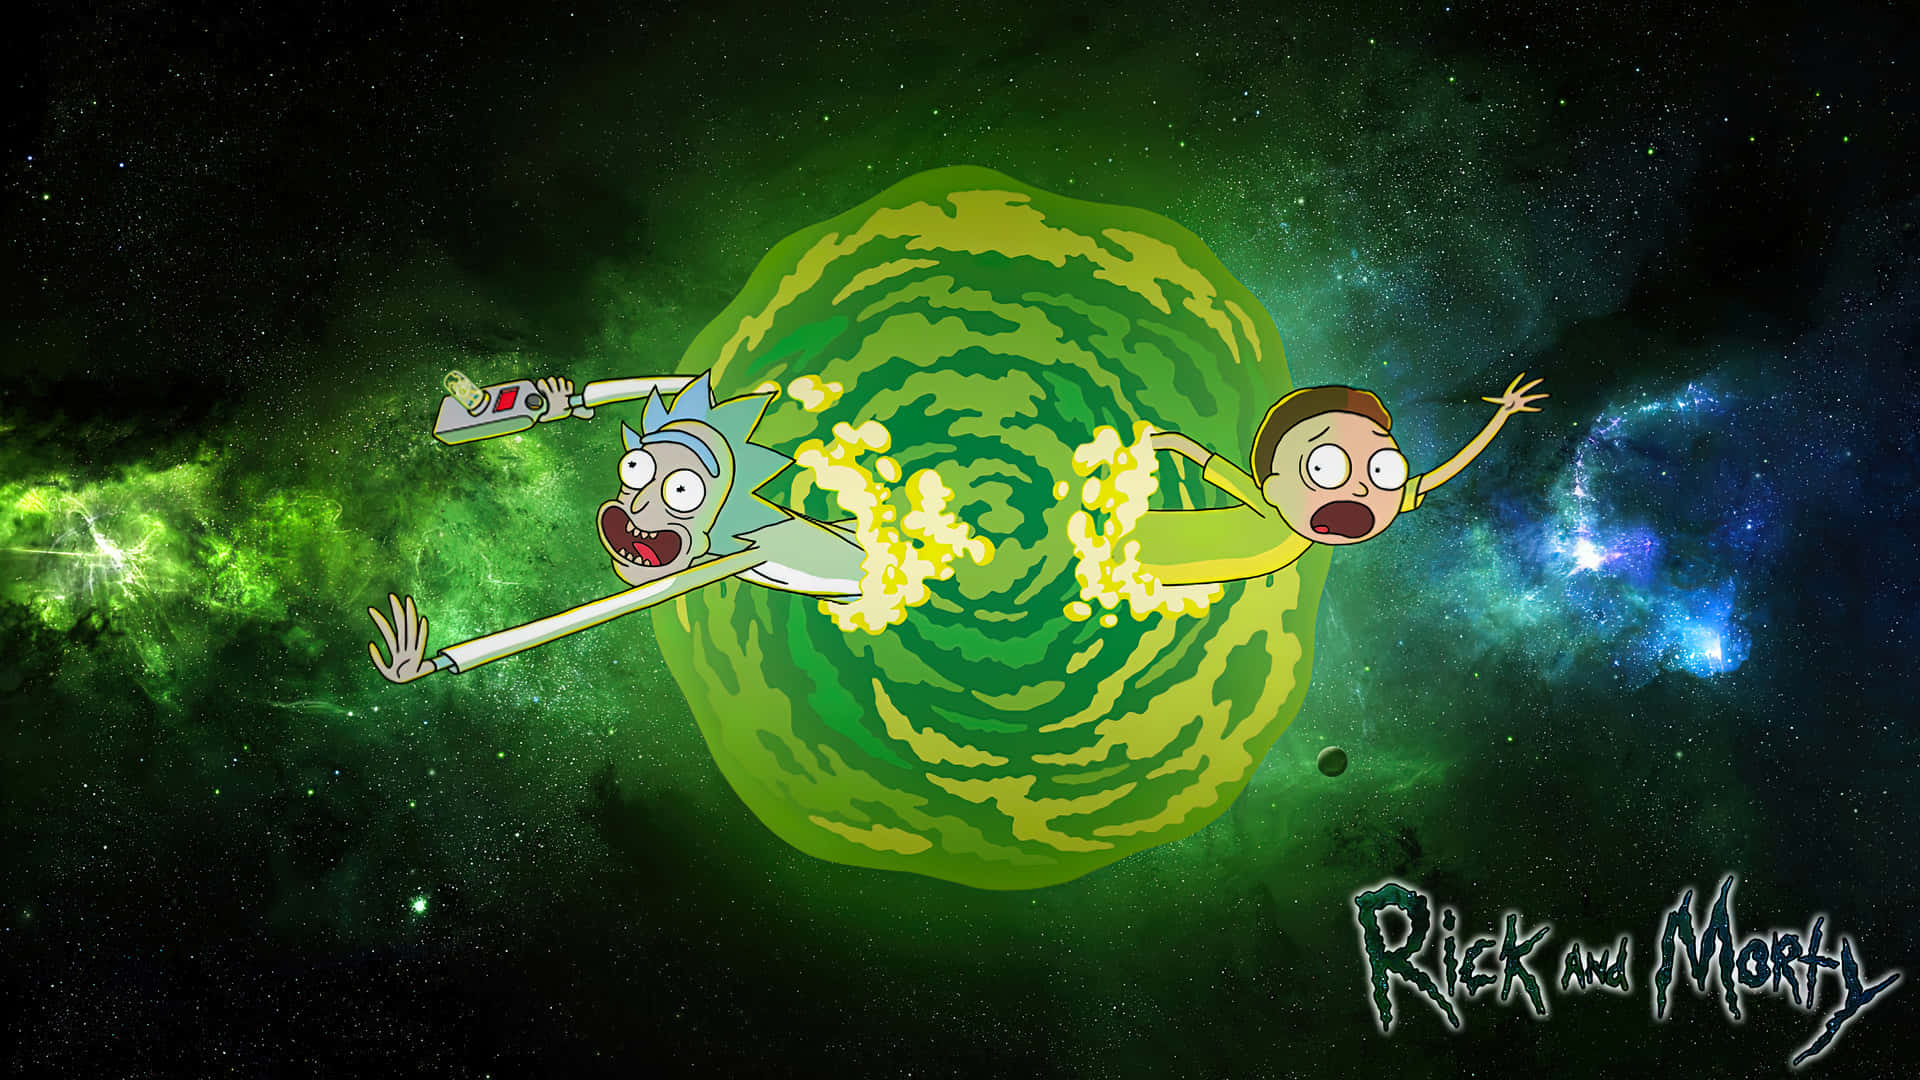 "The Adventures of Rick and Morty"